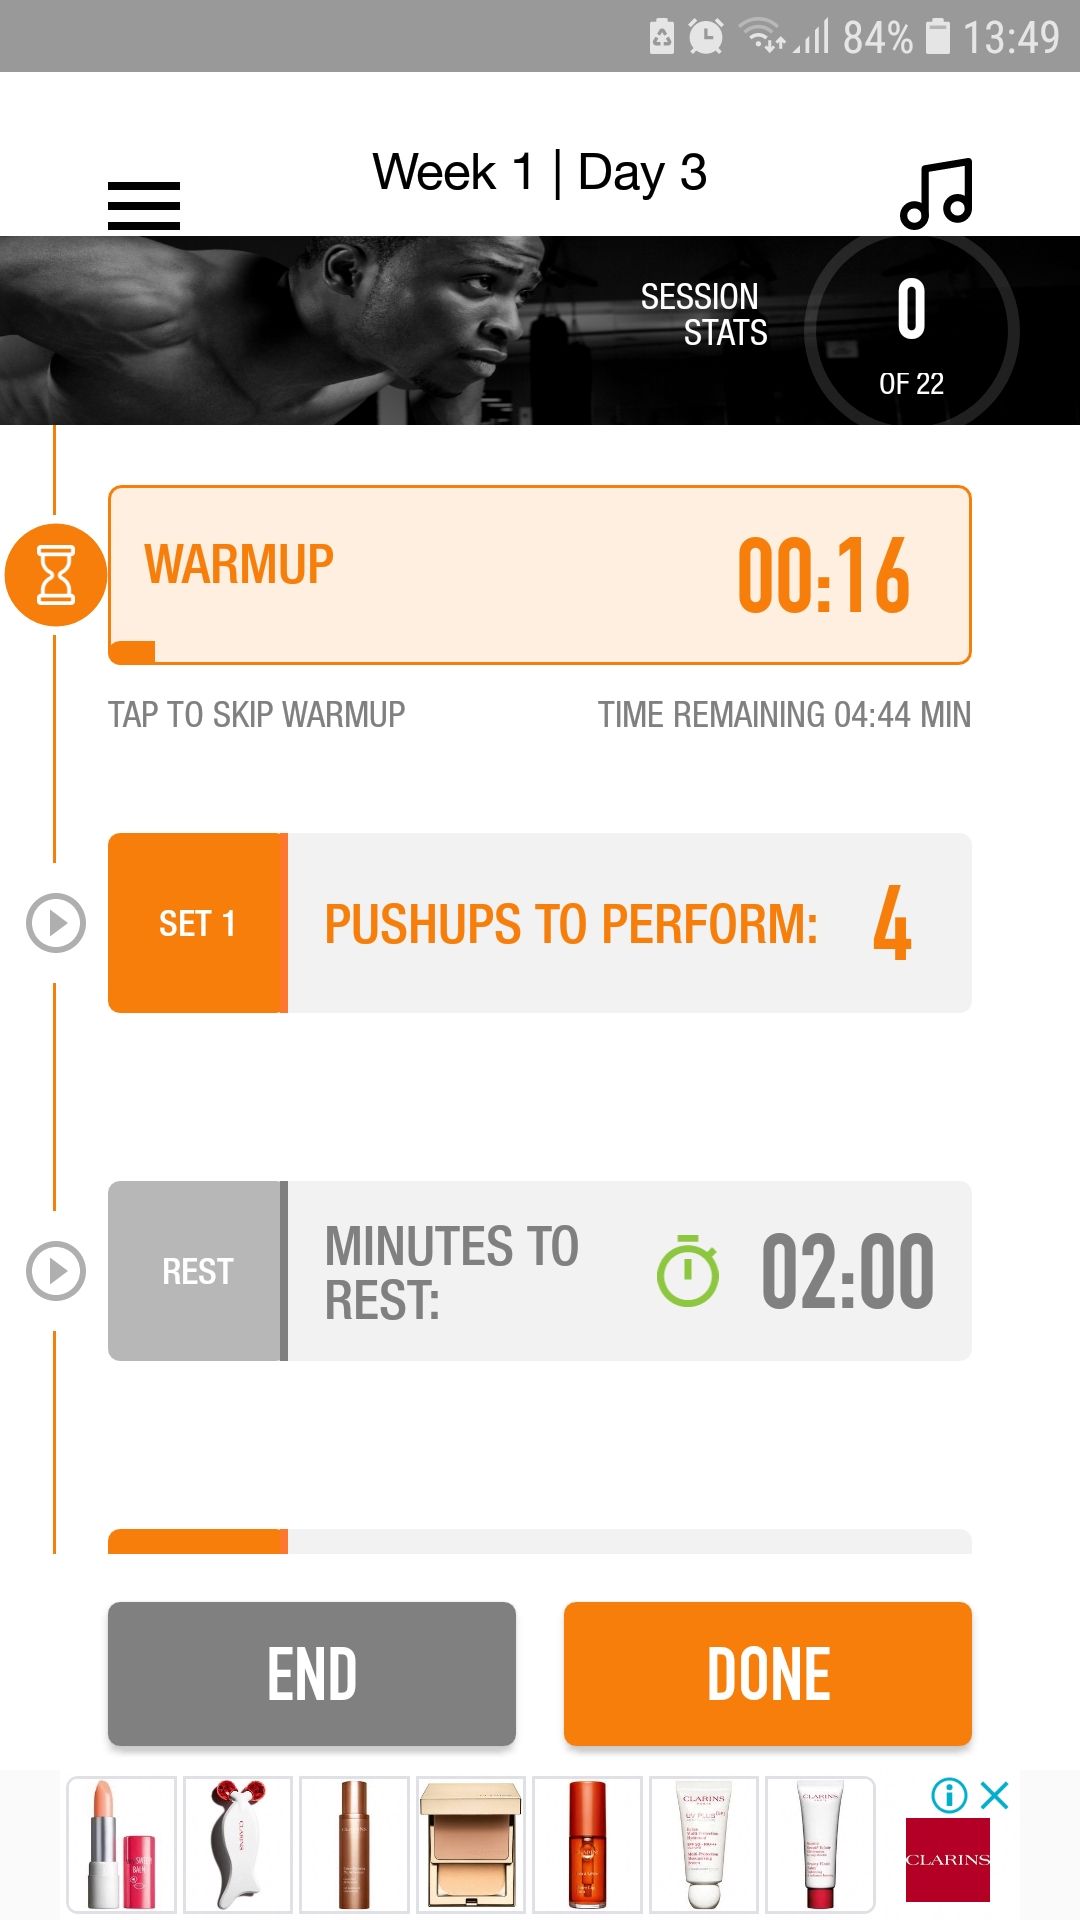 100 Pushups trainer mobile workout app workout